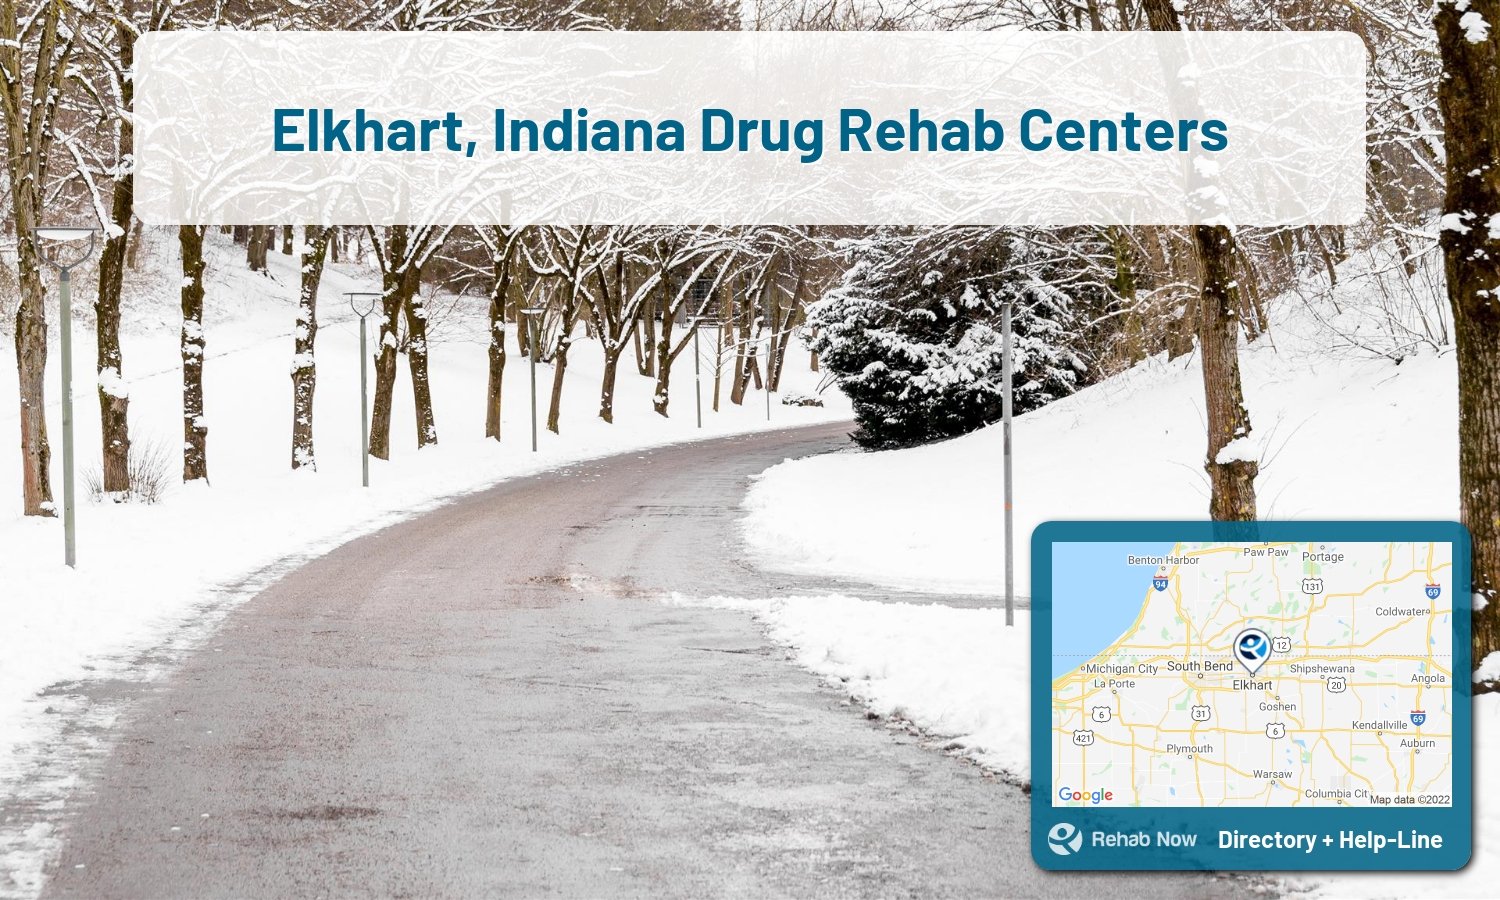 Elkhart, IN Treatment Centers. Find drug rehab in Elkhart, Indiana, or detox and treatment programs. Get the right help now!